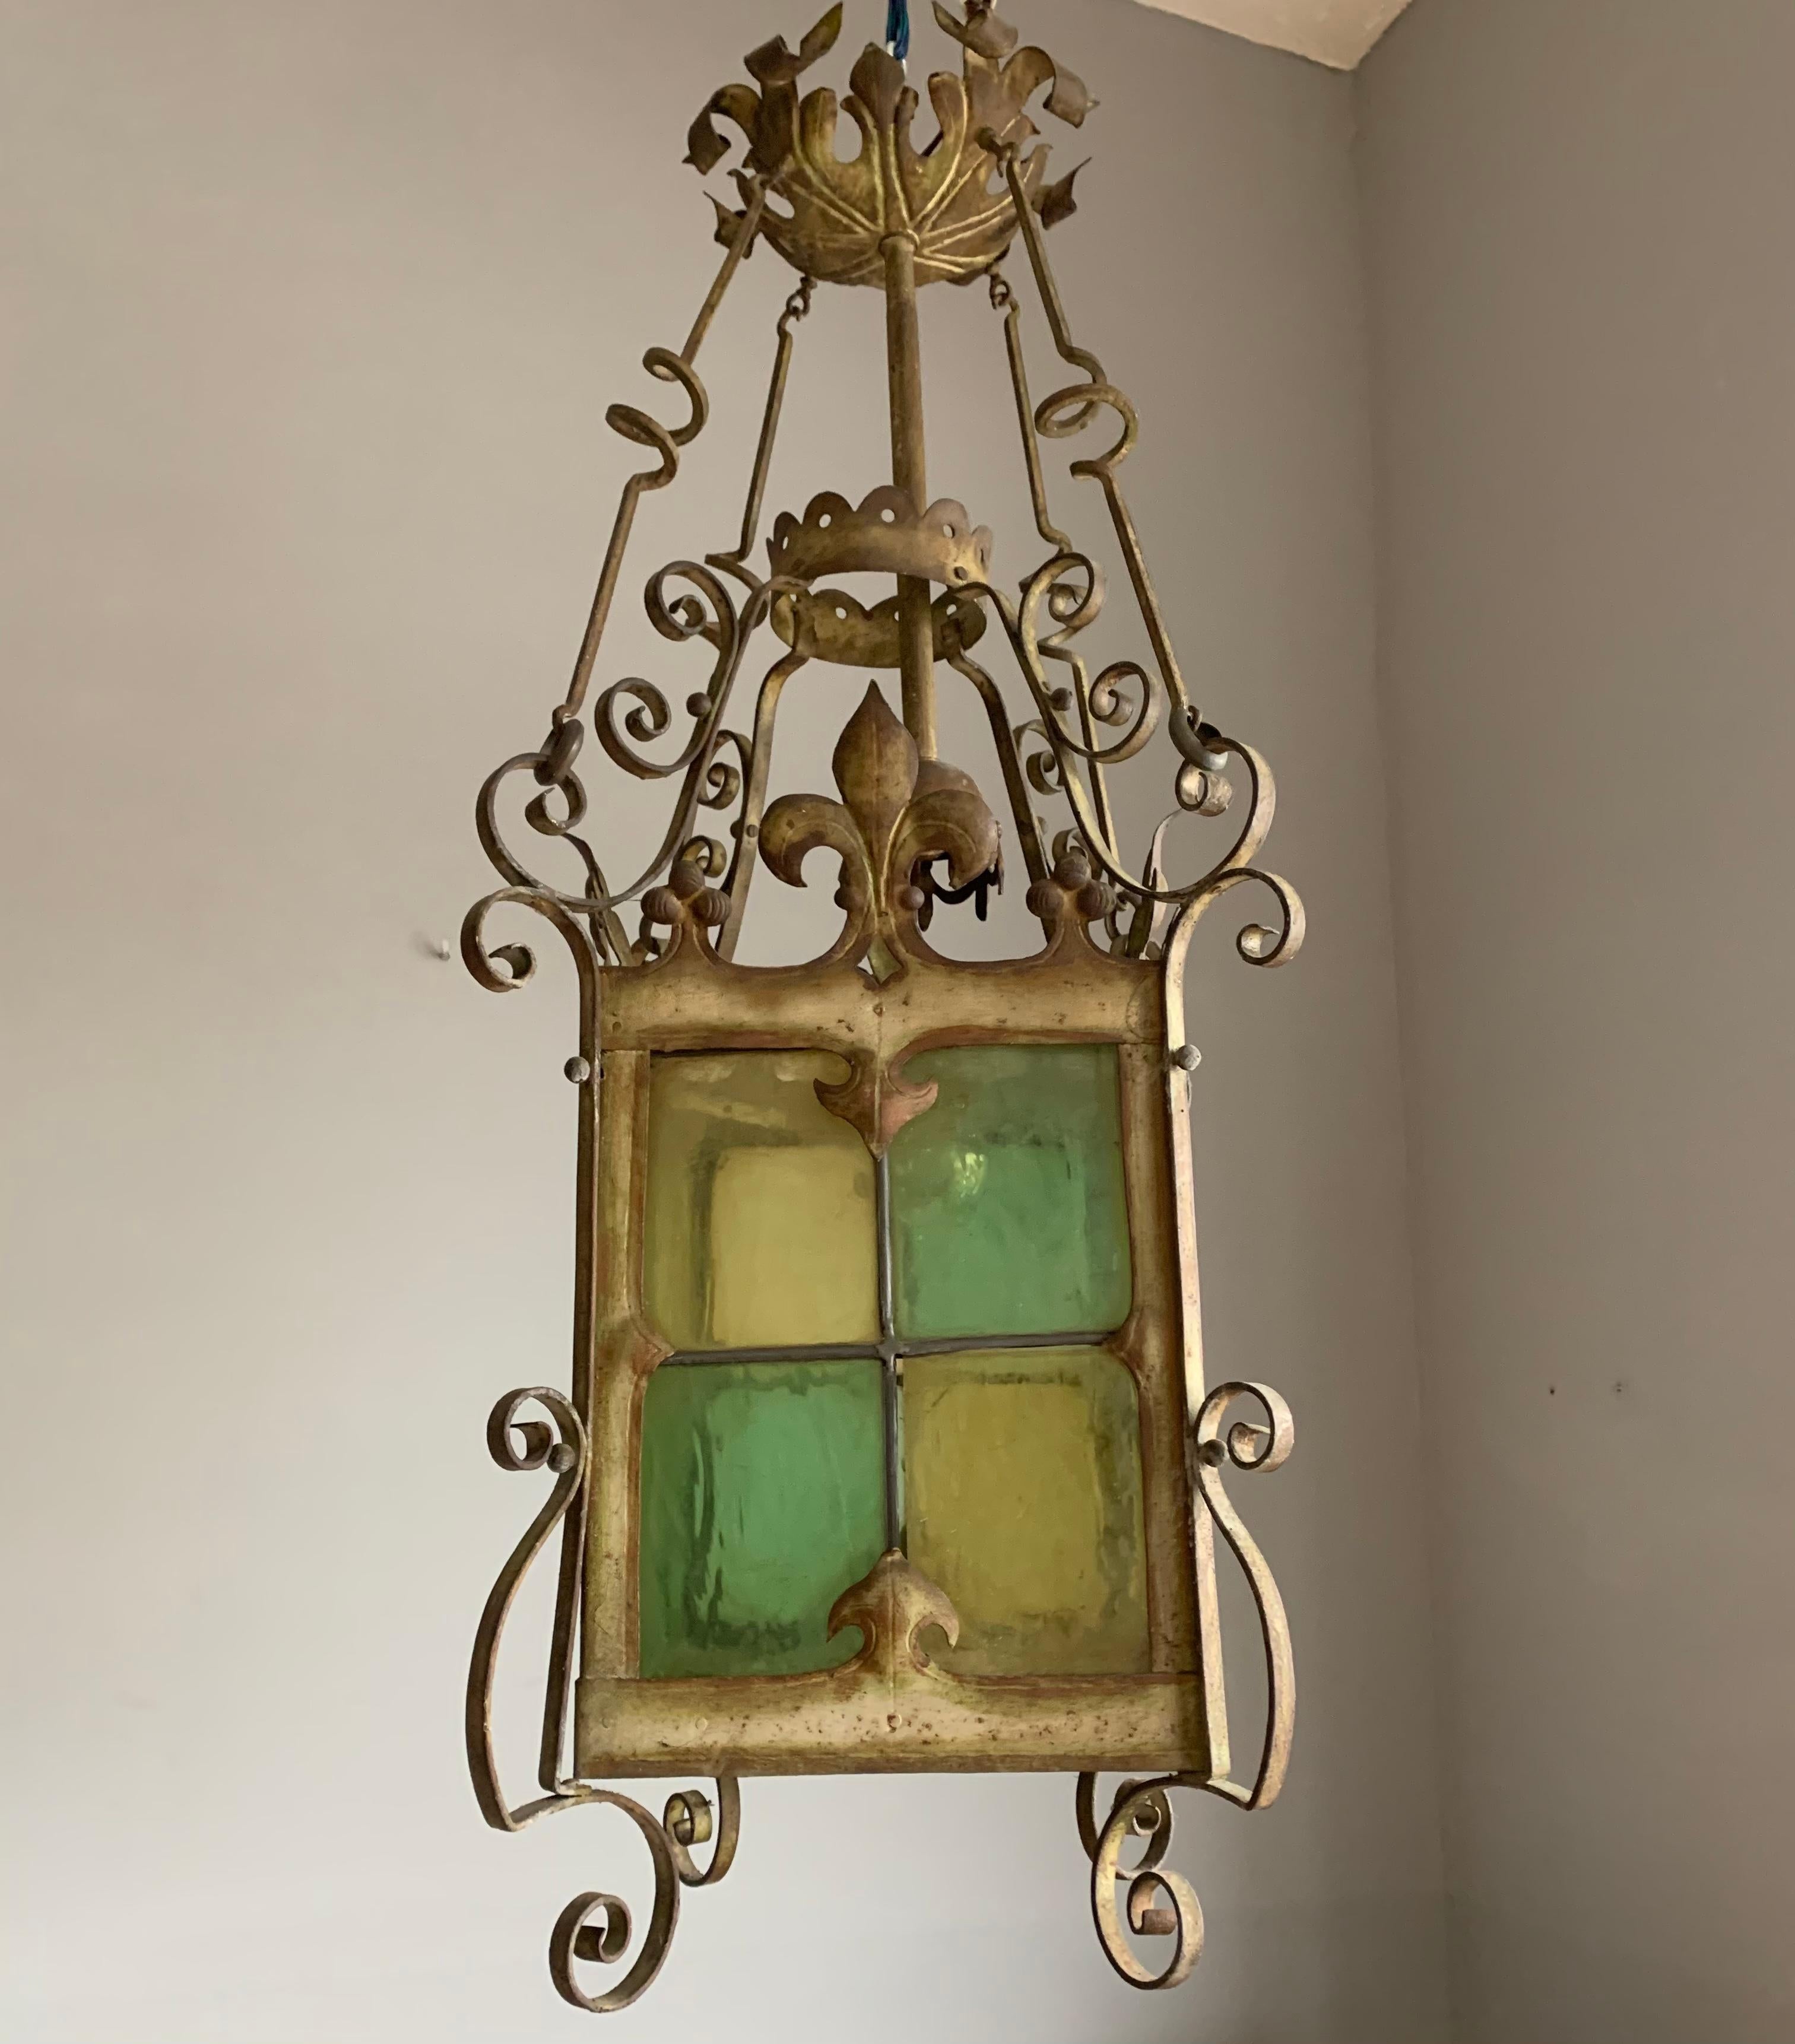 All handcrafted, form a France Castle, Gothic light fixture.

If you are a collector of rare and ancient looking Gothic antiques then this large and one of a kind pendant could be flying your way soon. With antique light fixtures as one of our